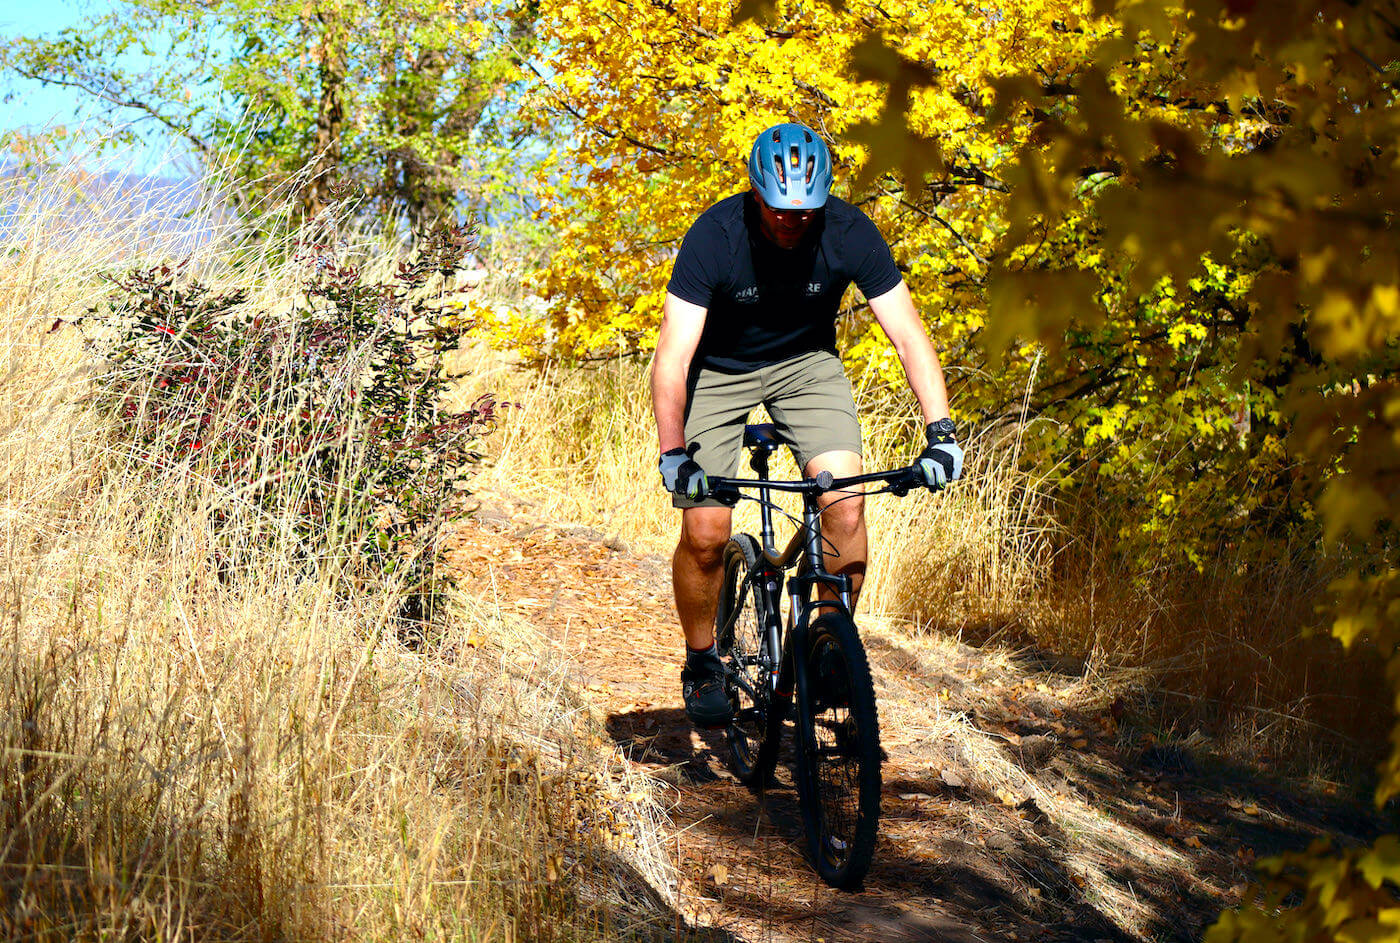 This photo shows the author wearing the Showers Pass Apex DWR 12" Shorts on a mountain biking ride.